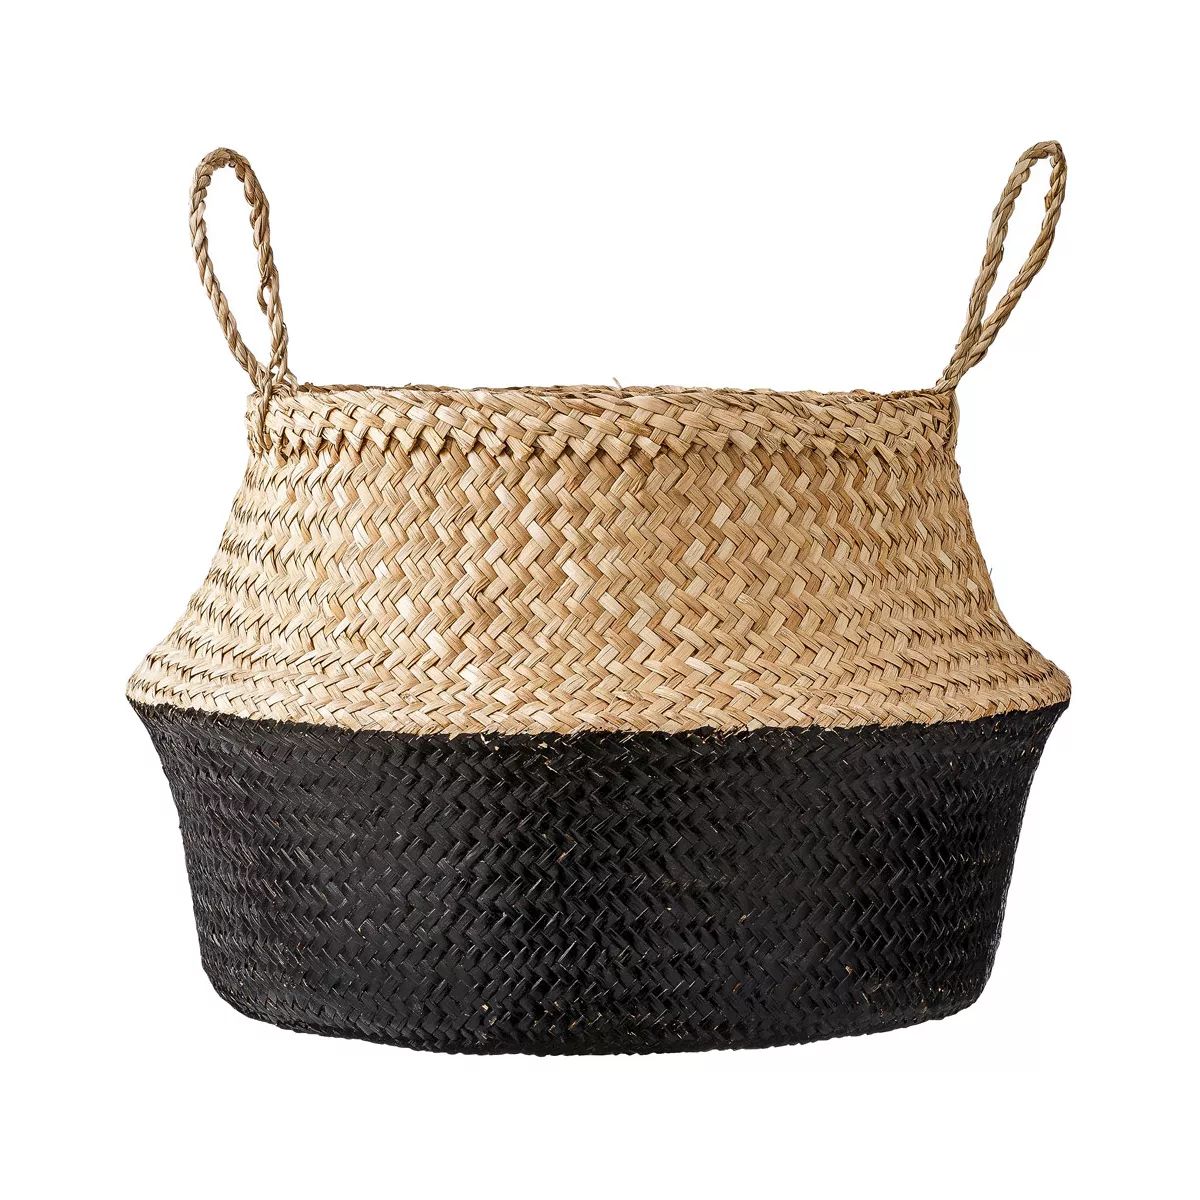 Seagrass Basket with Handles 11.5" x 19" Natural/Black - Storied Home | Target